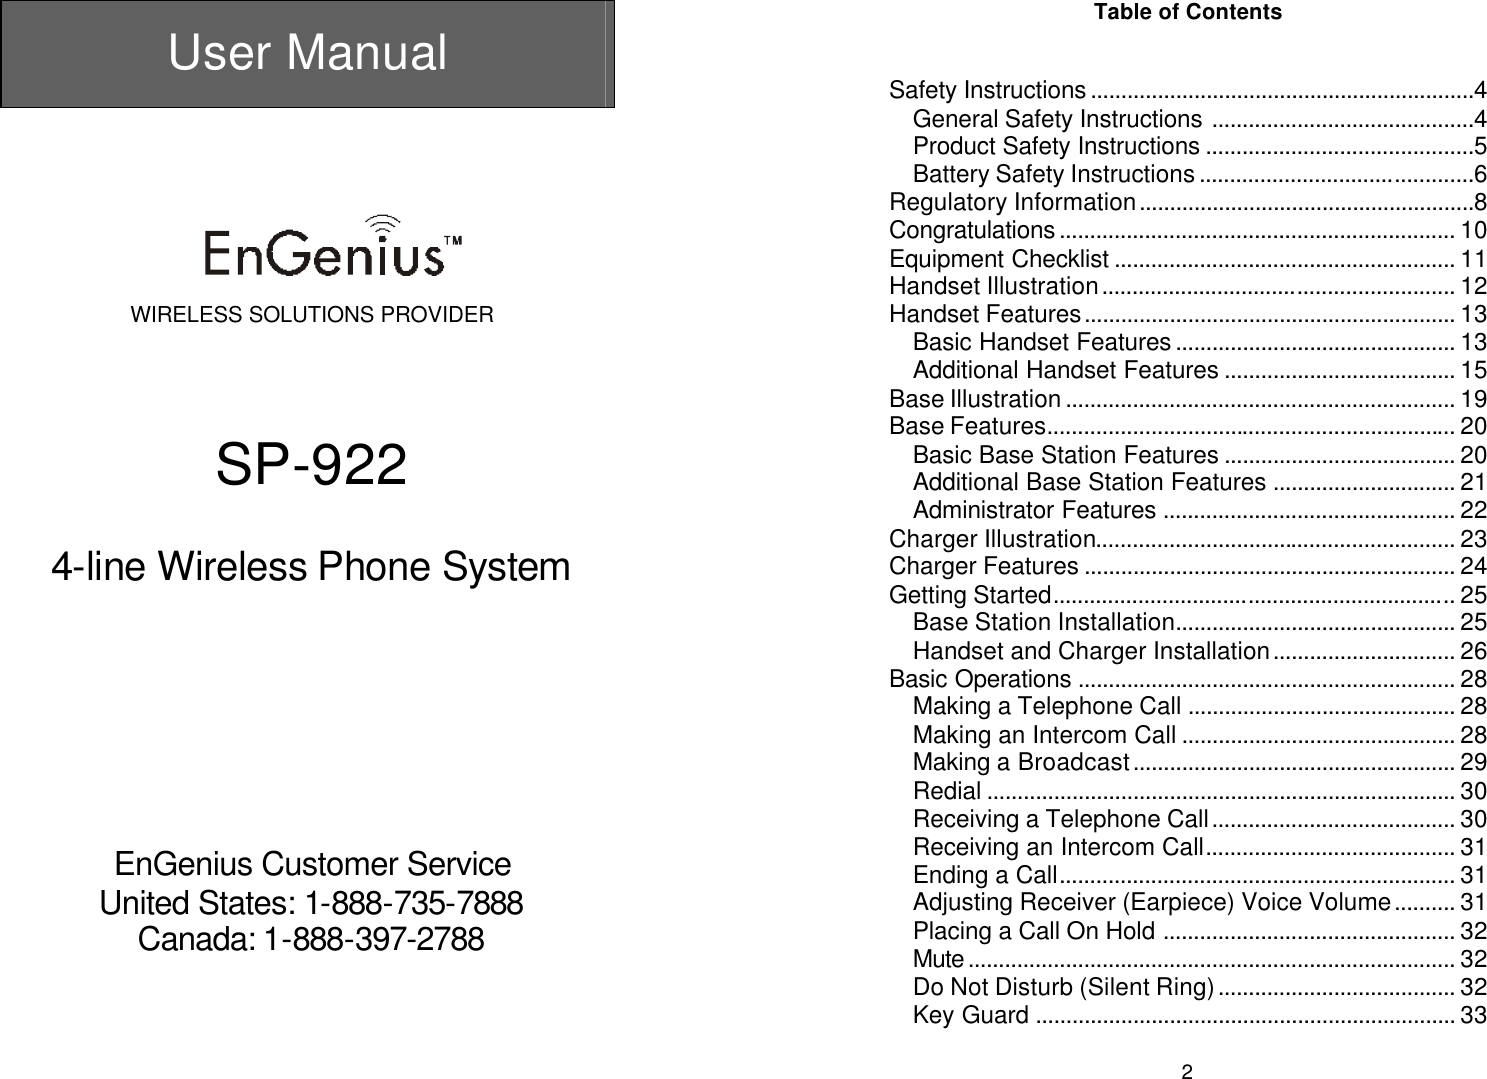  User Manual       WIRELESS SOLUTIONS PROVIDER     SP-922  4-line Wireless Phone System           EnGenius Customer Service United States: 1-888-735-7888 Canada: 1-888-397-2788   2Table of Contents   Safety Instructions...............................................................4 General Safety Instructions ...........................................4 Product Safety Instructions ............................................5 Battery Safety Instructions.............................................6 Regulatory Information.......................................................8 Congratulations.................................................................10 Equipment Checklist ........................................................ 11 Handset Illustration.......................................................... 12 Handset Features............................................................. 13 Basic Handset Features.............................................. 13 Additional Handset Features ...................................... 15 Base Illustration................................................................ 19 Base Features................................................................... 20 Basic Base Station Features ...................................... 20 Additional Base Station Features .............................. 21 Administrator Features ................................................ 22 Charger Illustration........................................................... 23 Charger Features ............................................................. 24 Getting Started.................................................................. 25 Base Station Installation.............................................. 25 Handset and Charger Installation.............................. 26 Basic Operations .............................................................. 28 Making a Telephone Call ............................................ 28 Making an Intercom Call ............................................. 28 Making a Broadcast..................................................... 29 Redial ............................................................................. 30 Receiving a Telephone Call........................................ 30 Receiving an Intercom Call......................................... 31 Ending a Call.................................................................31 Adjusting Receiver (Earpiece) Voice Volume.......... 31 Placing a Call On Hold ................................................ 32 Mute................................................................................ 32 Do Not Disturb (Silent Ring)....................................... 32 Key Guard ..................................................................... 33 